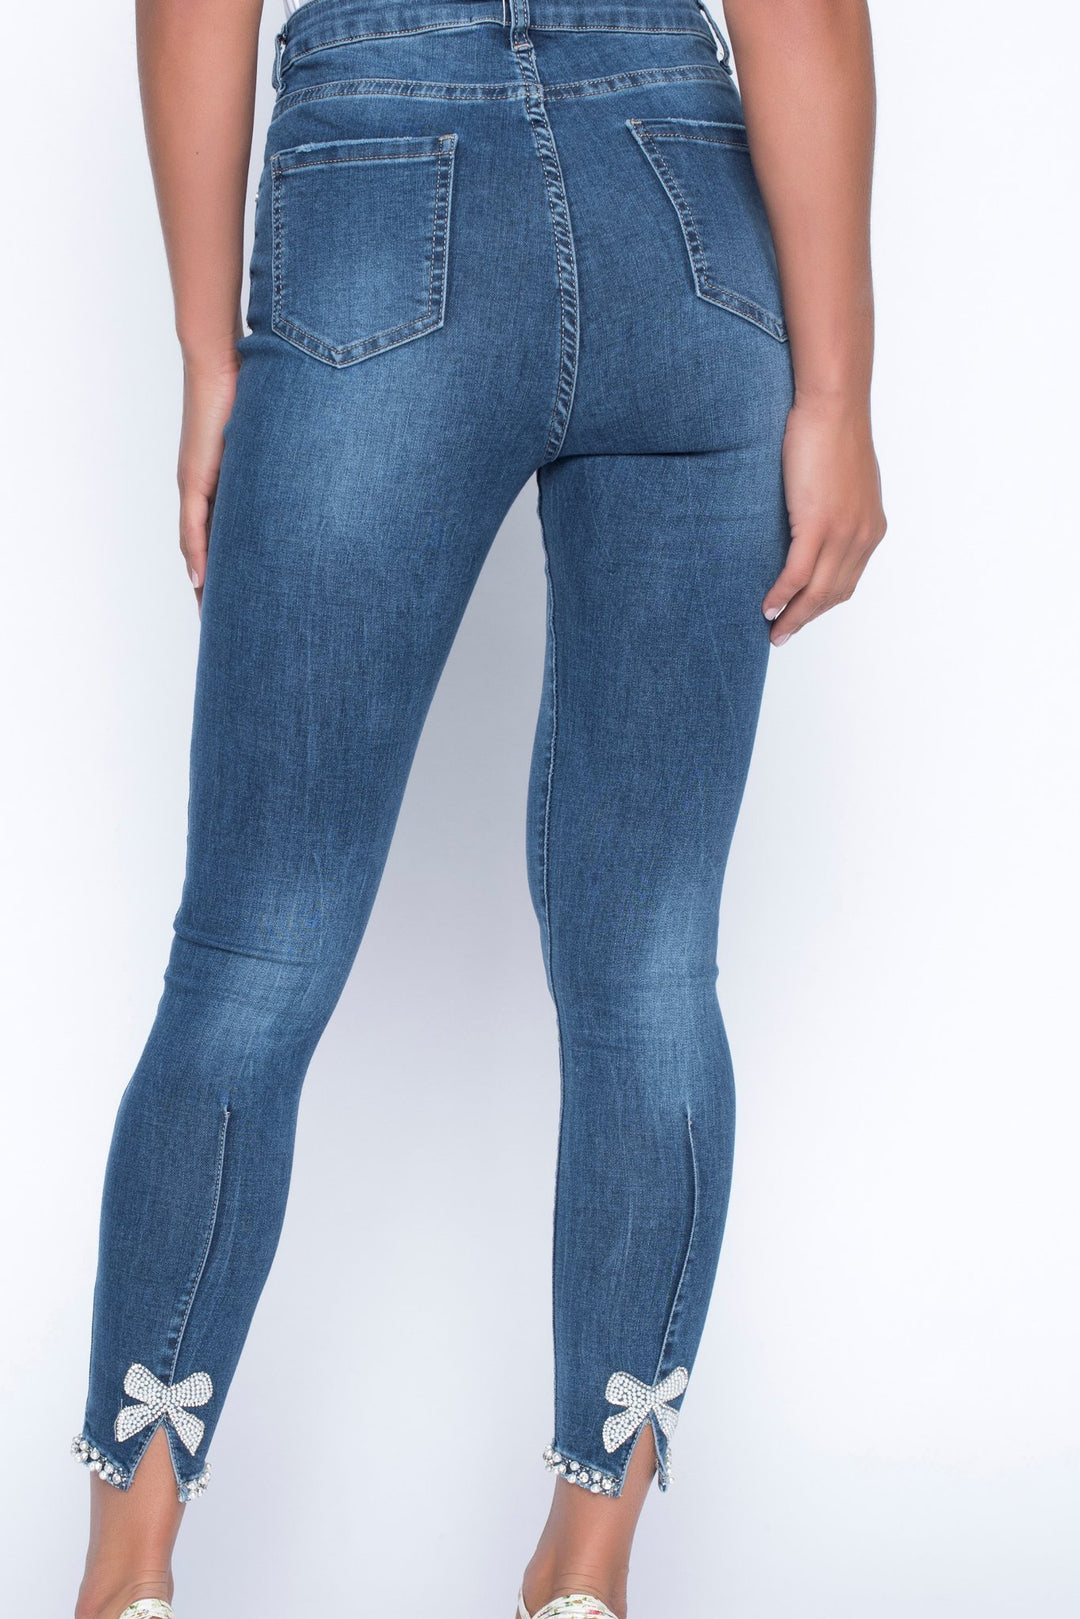 Frank Lyman 190117U  Jean with Pearl and Diamante Back Lifestyle | Dotique